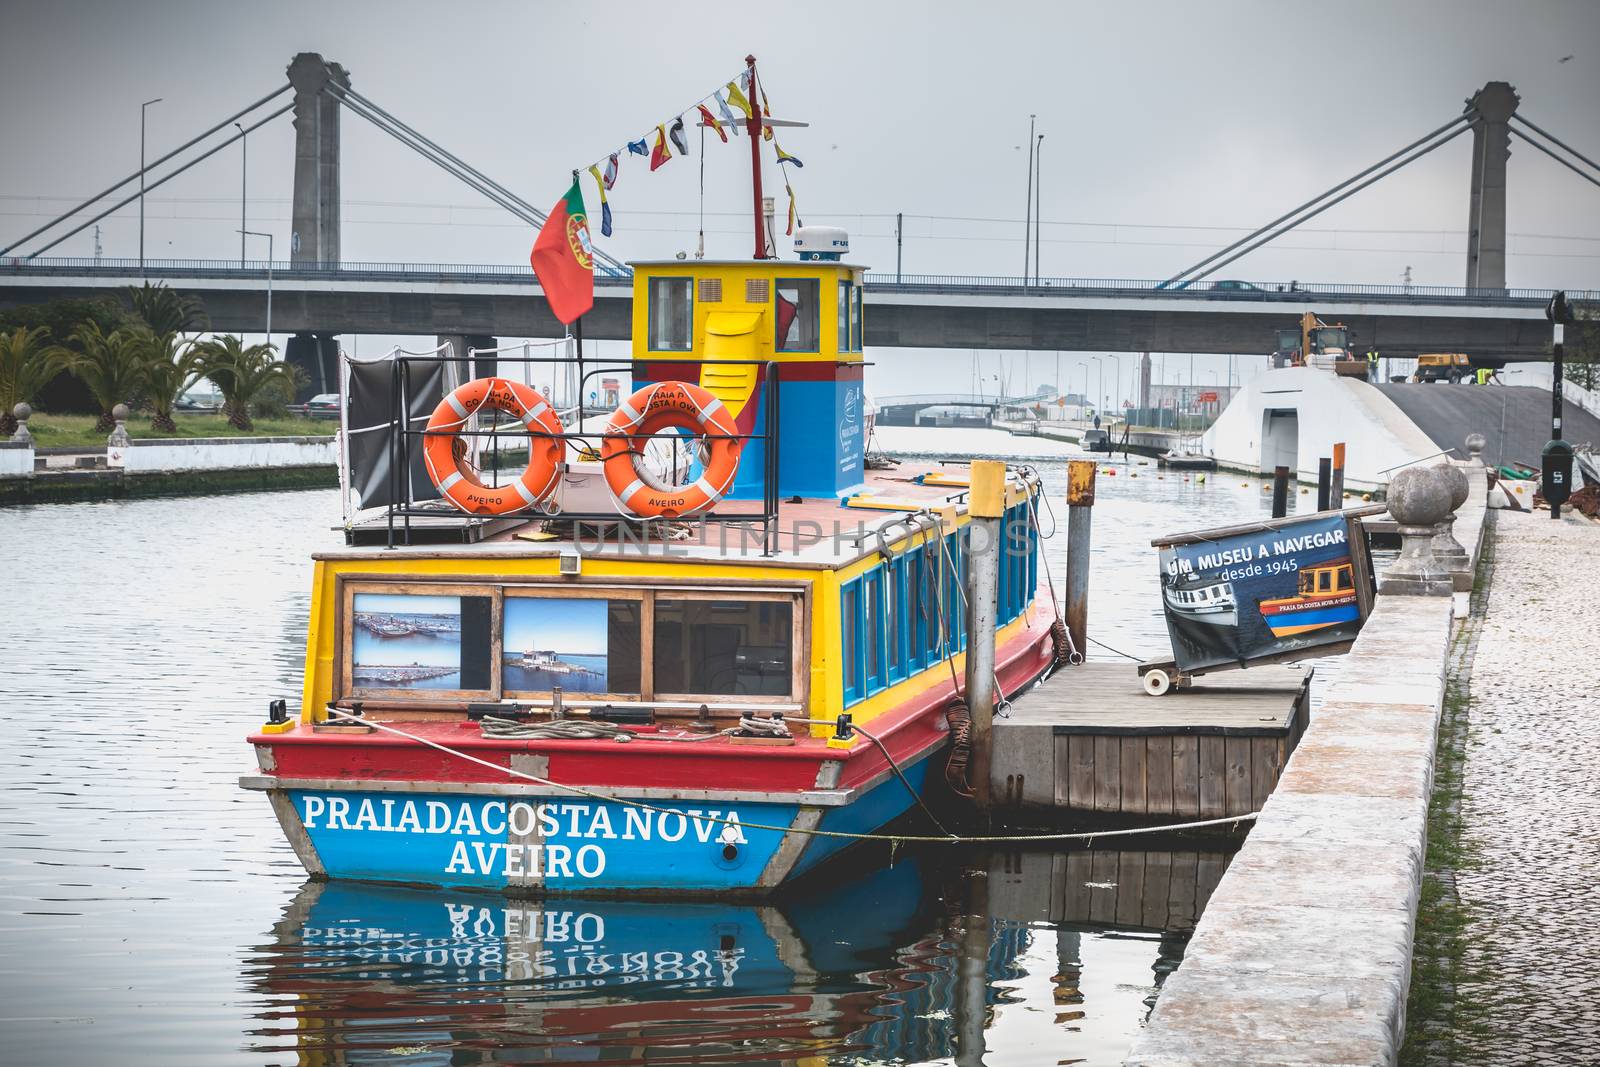 Tourist transport boat docked at the end of the day in aveiro, p by AtlanticEUROSTOXX